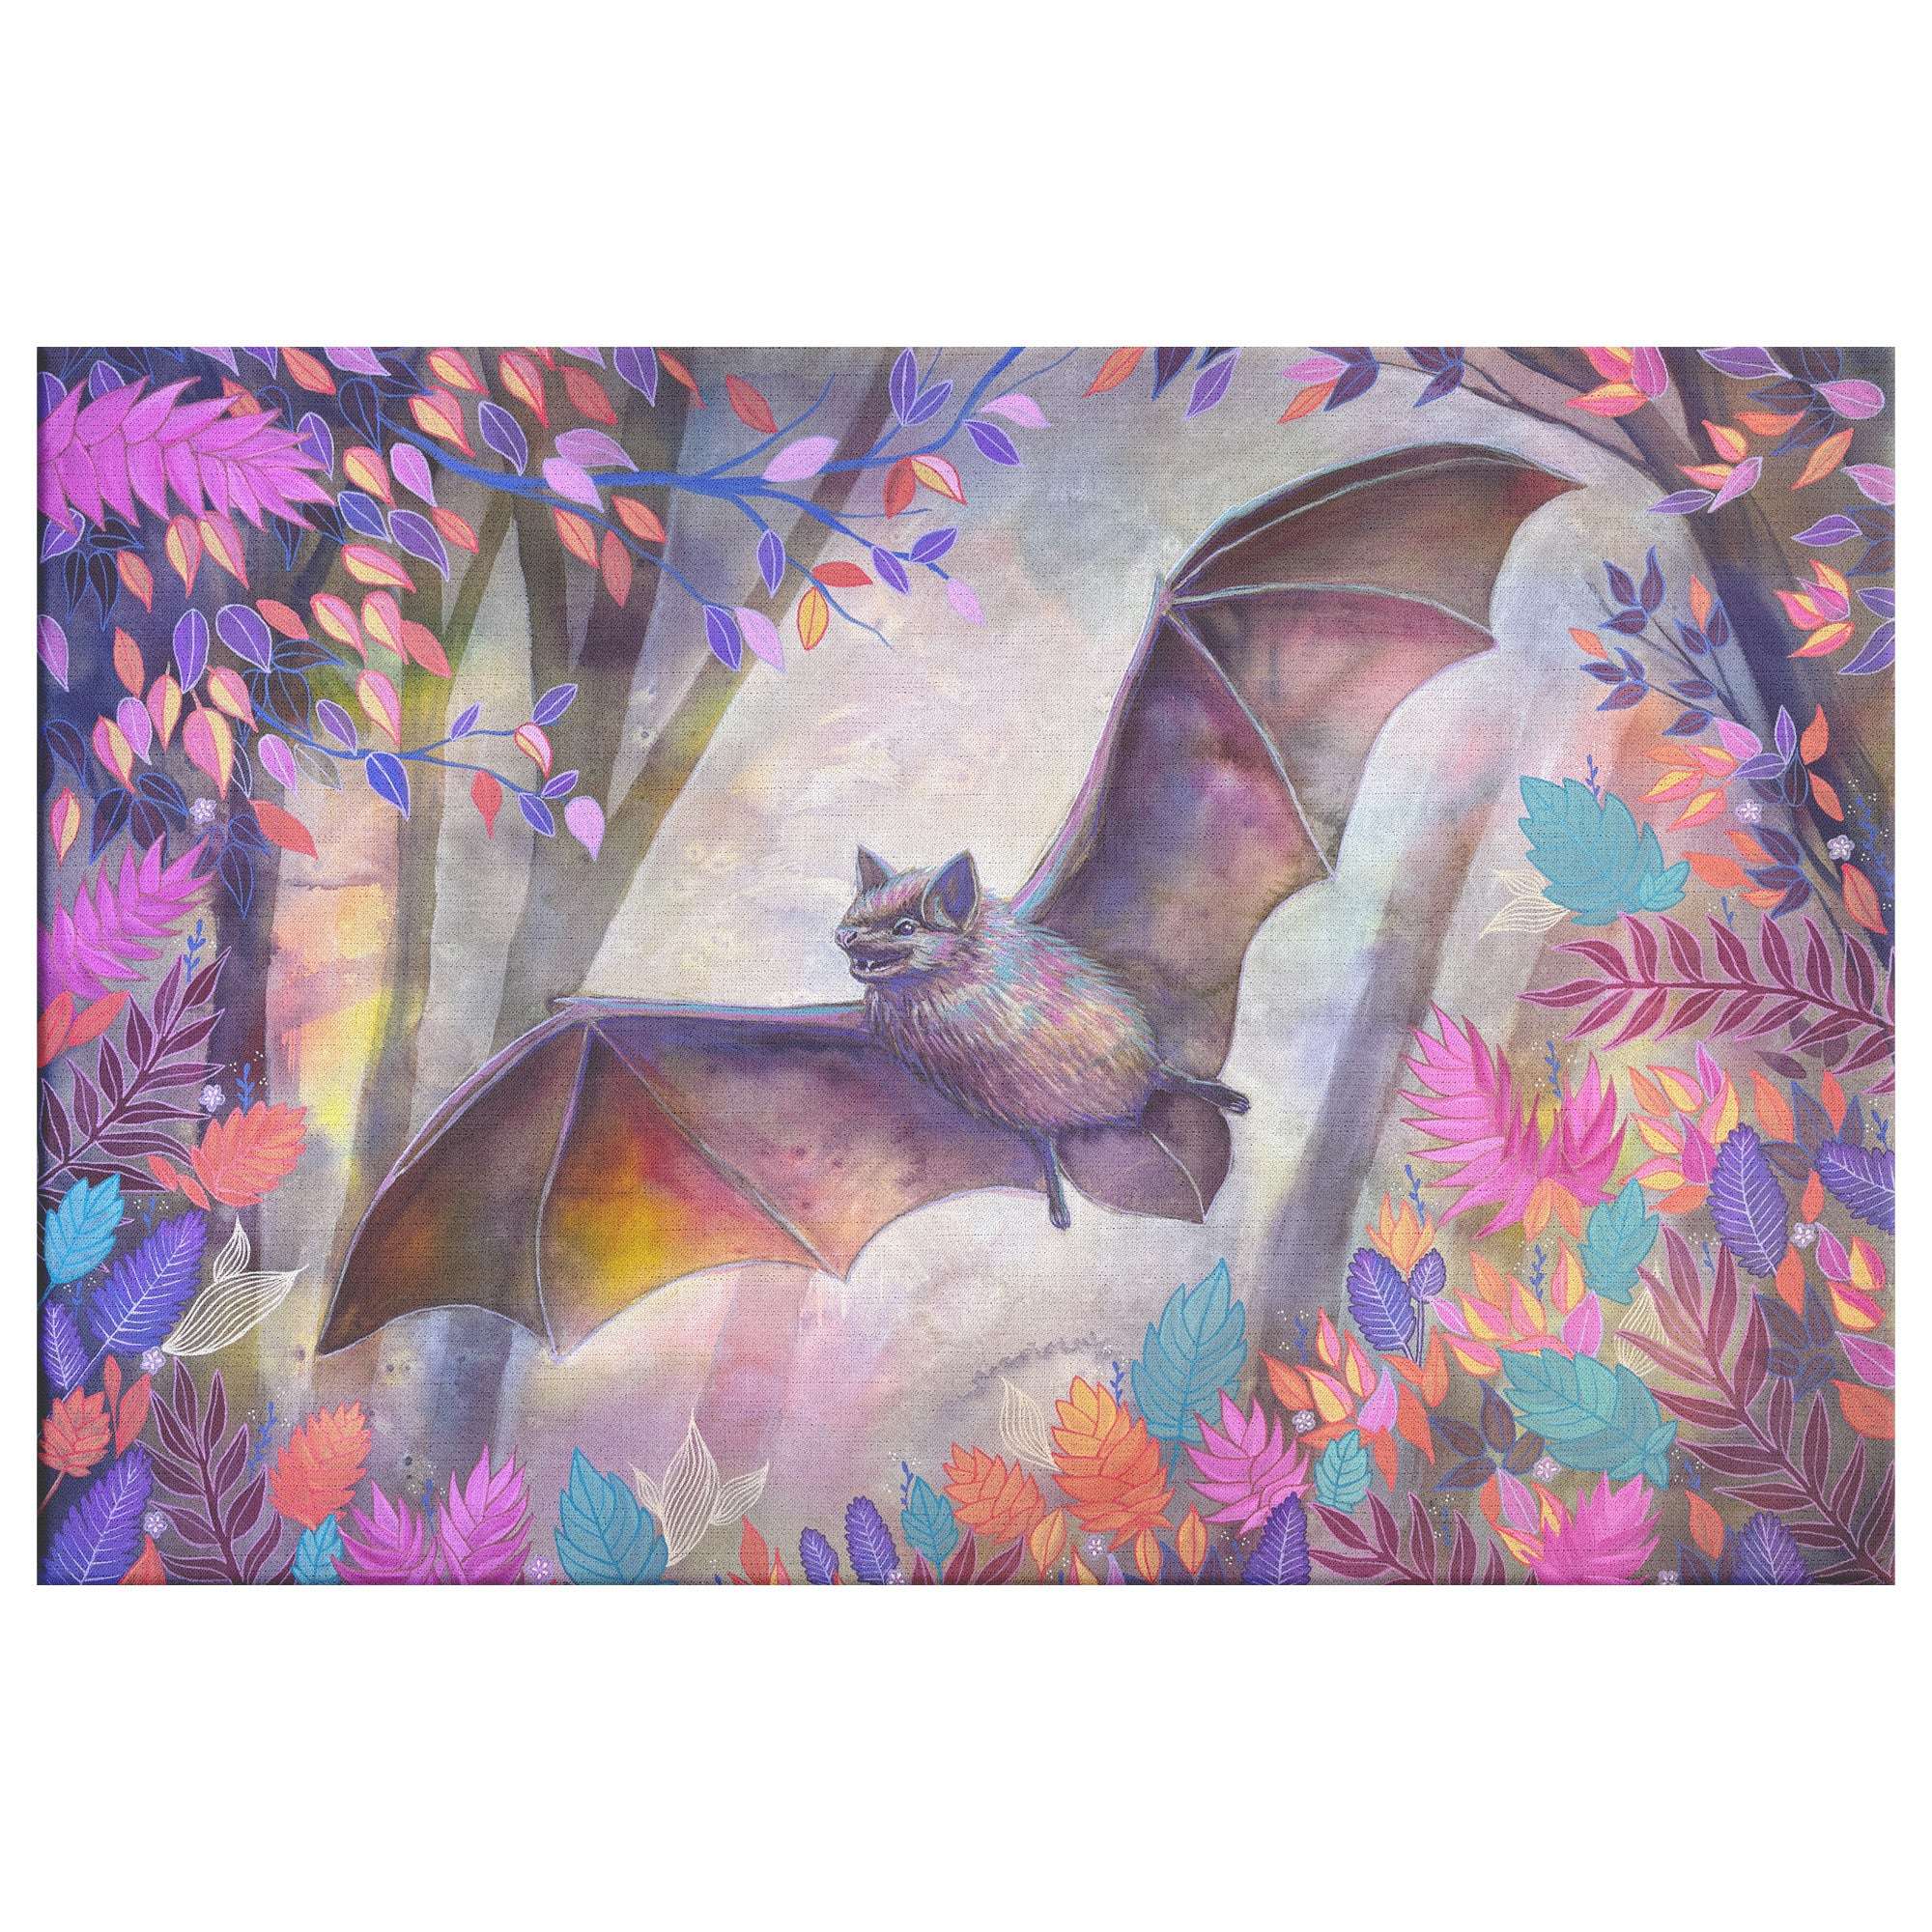 A Canvas Bat Print with spread wings flying among colorful foliage and trees, featuring a soft, pastel color palette.